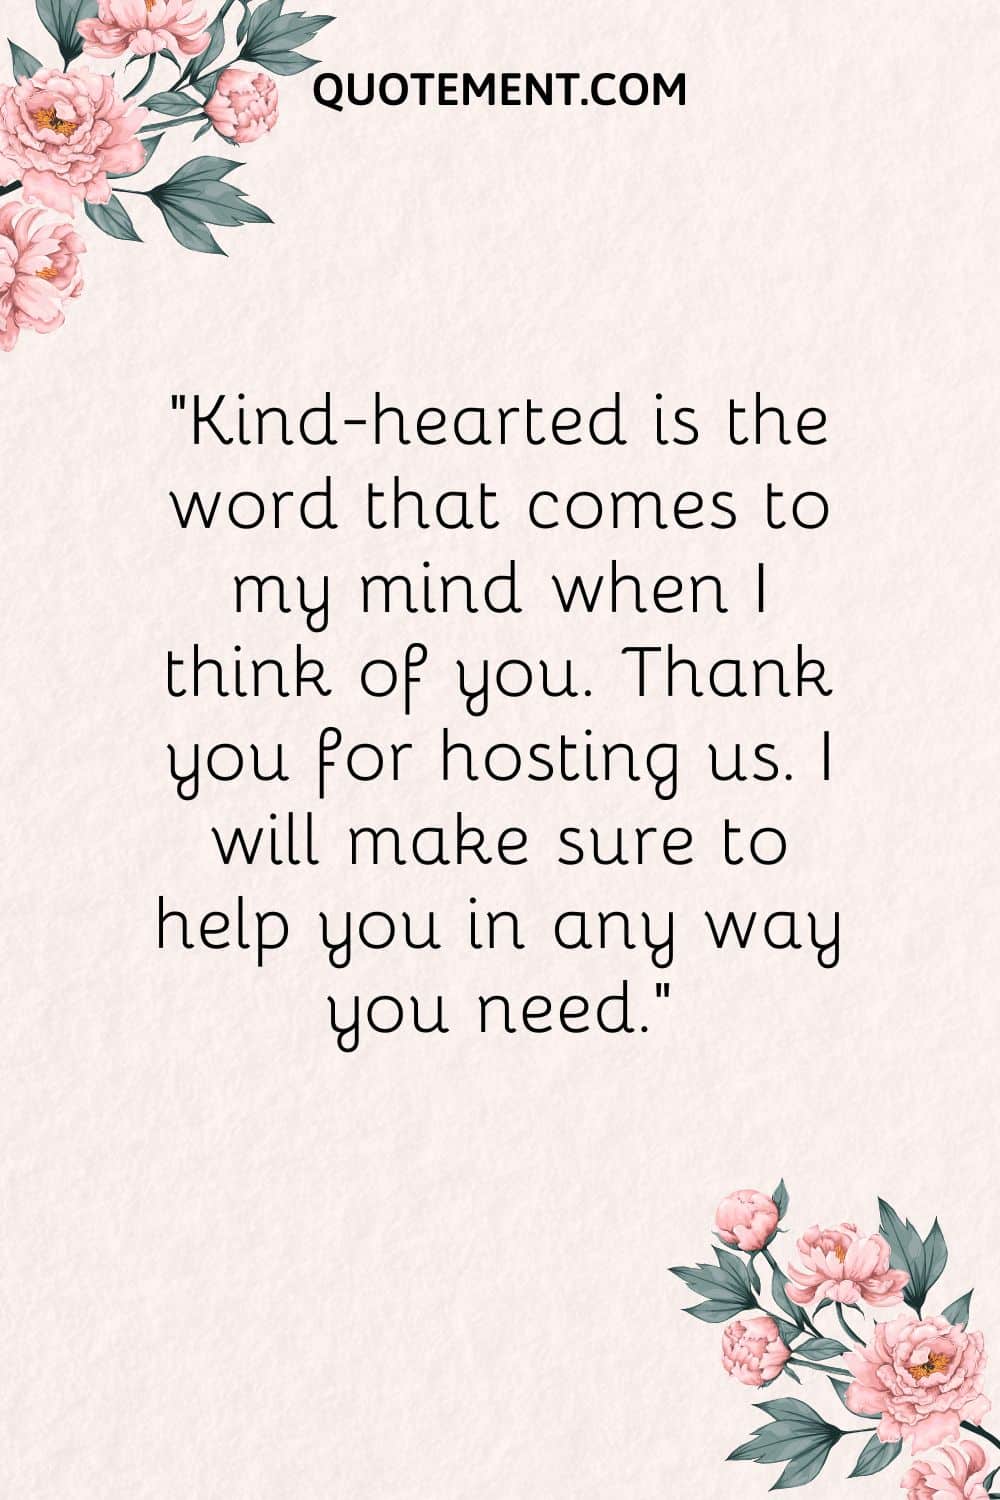 Kind-hearted is the word that comes to my mind when I think of you.